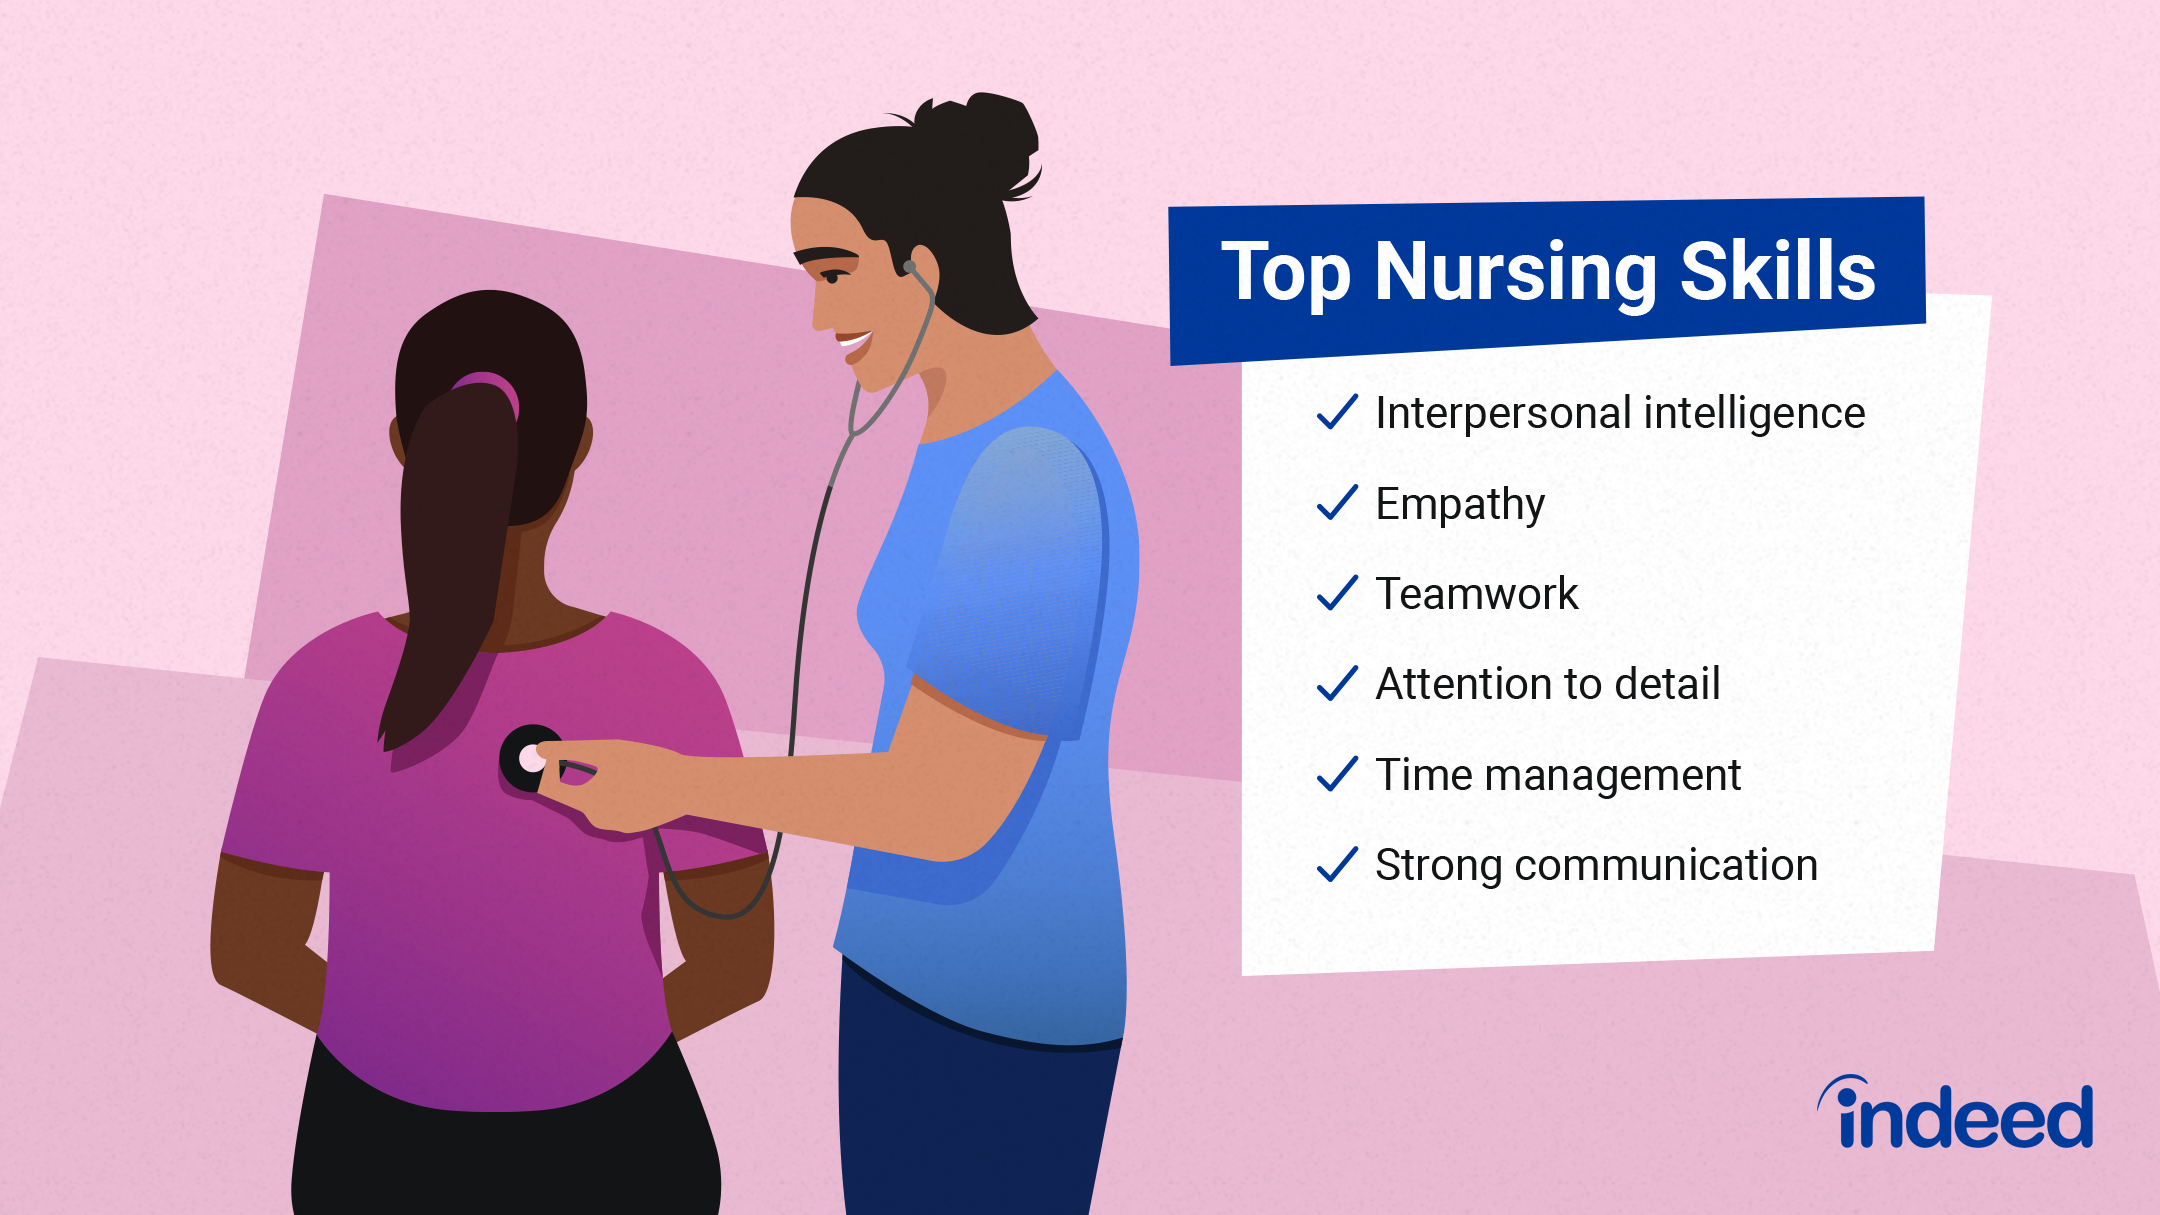 20 Examples of Nursing Strengths to Highlight - Care Options for Kids